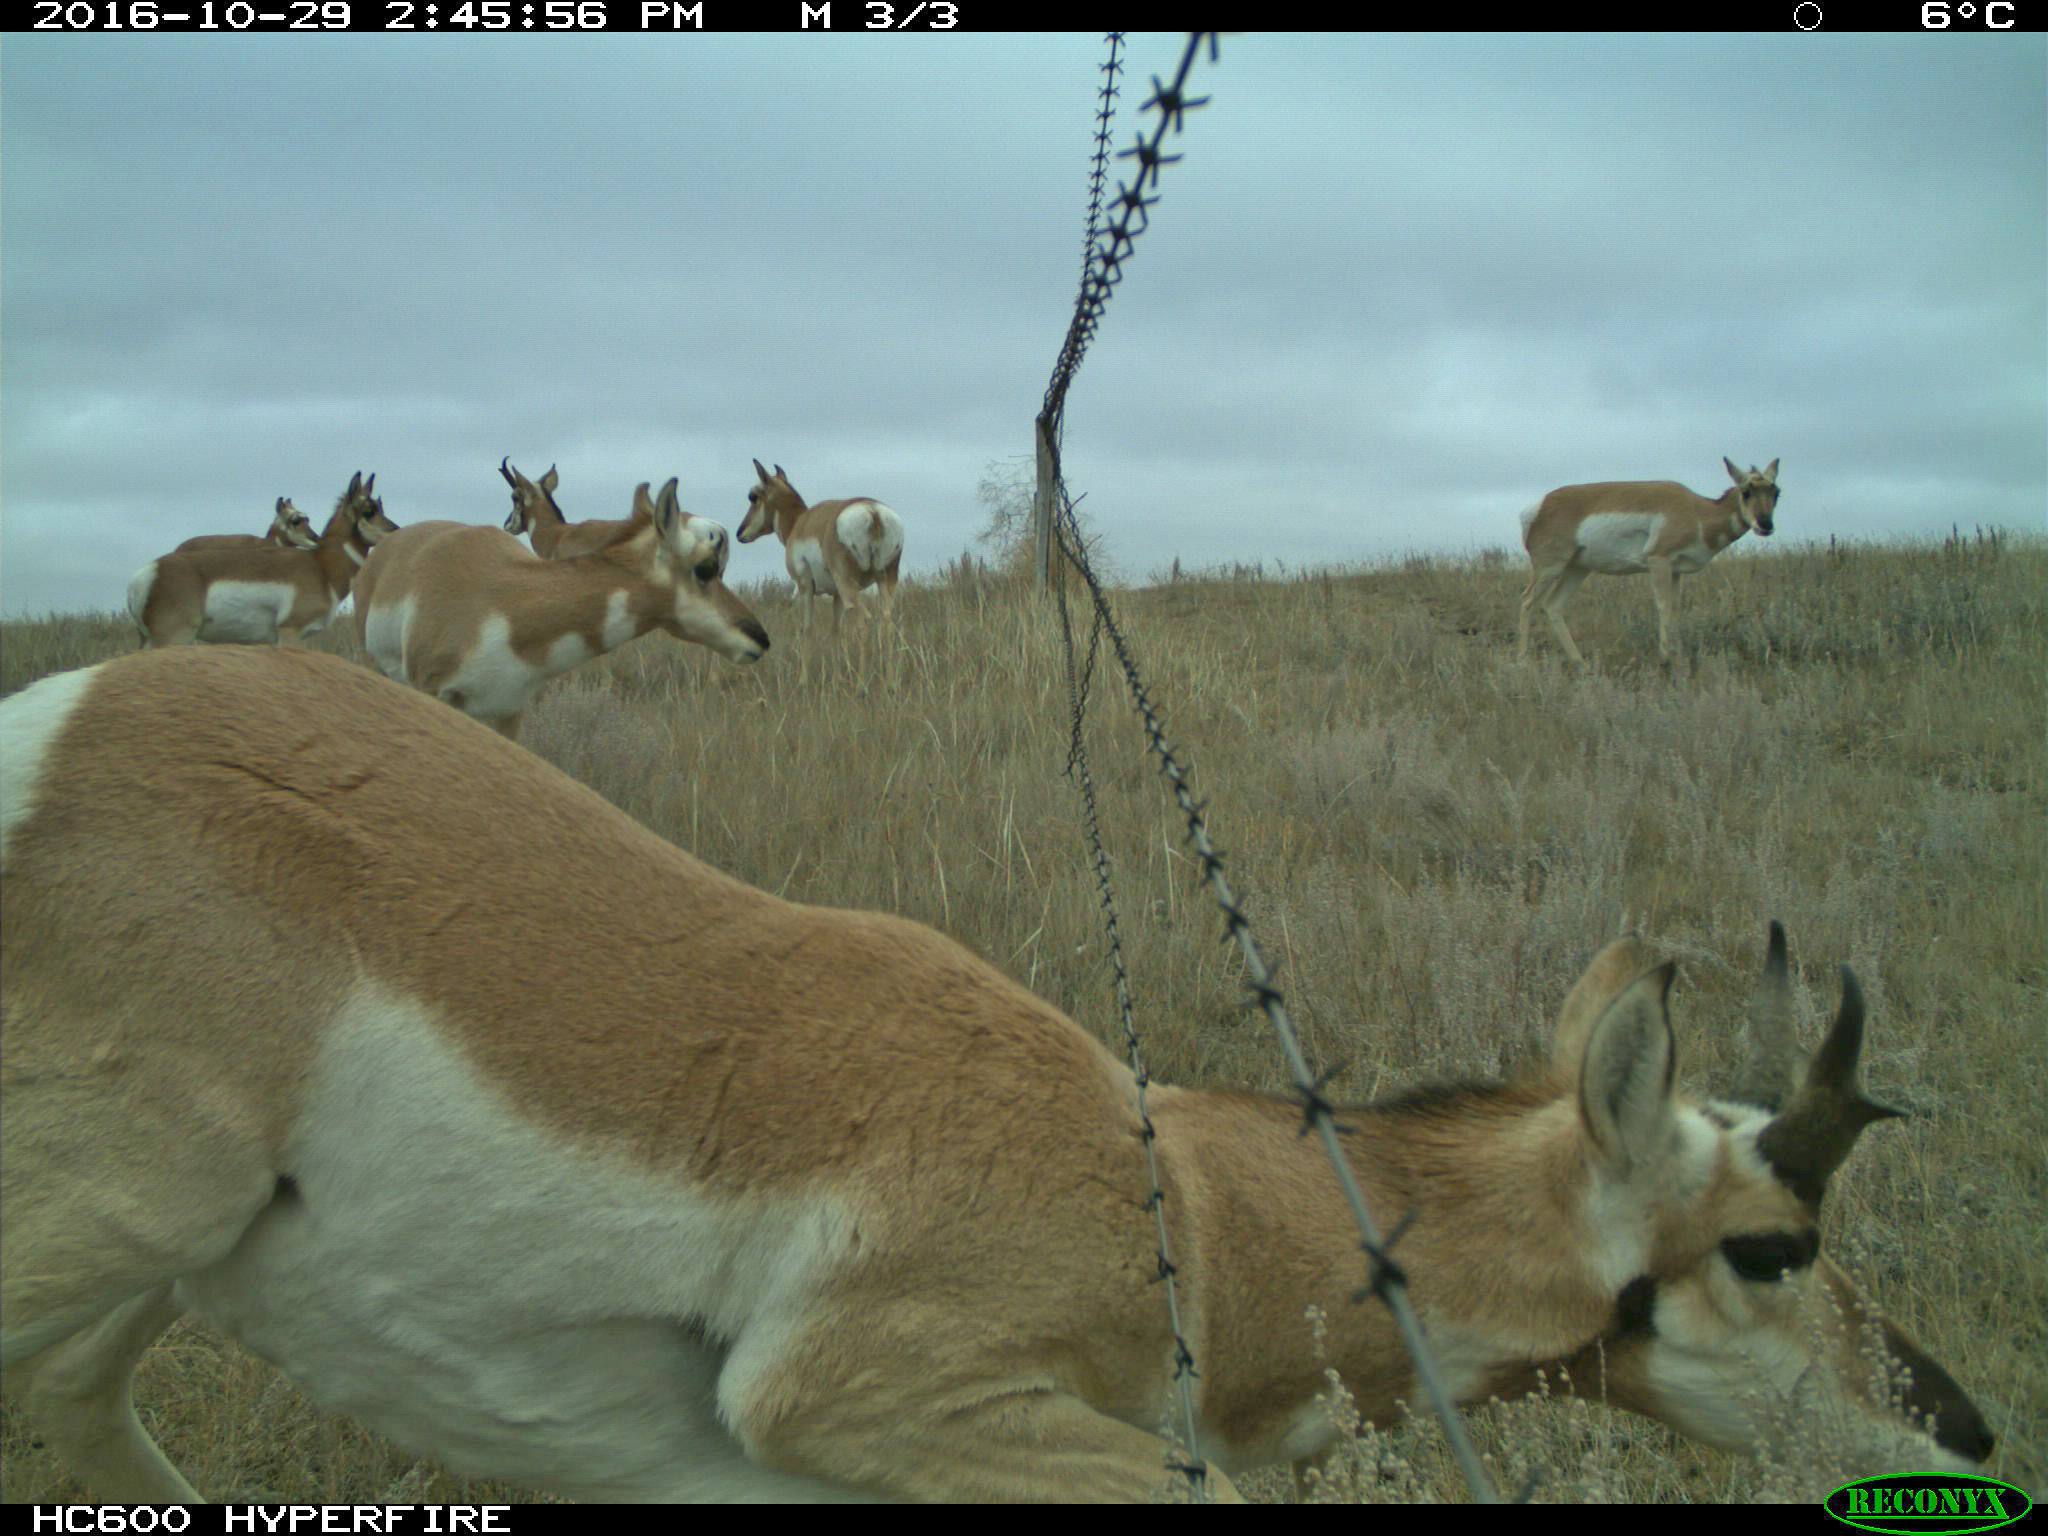 1 pronghorn Crossing Under too low How Can the Pronghorn Cross the Fence?